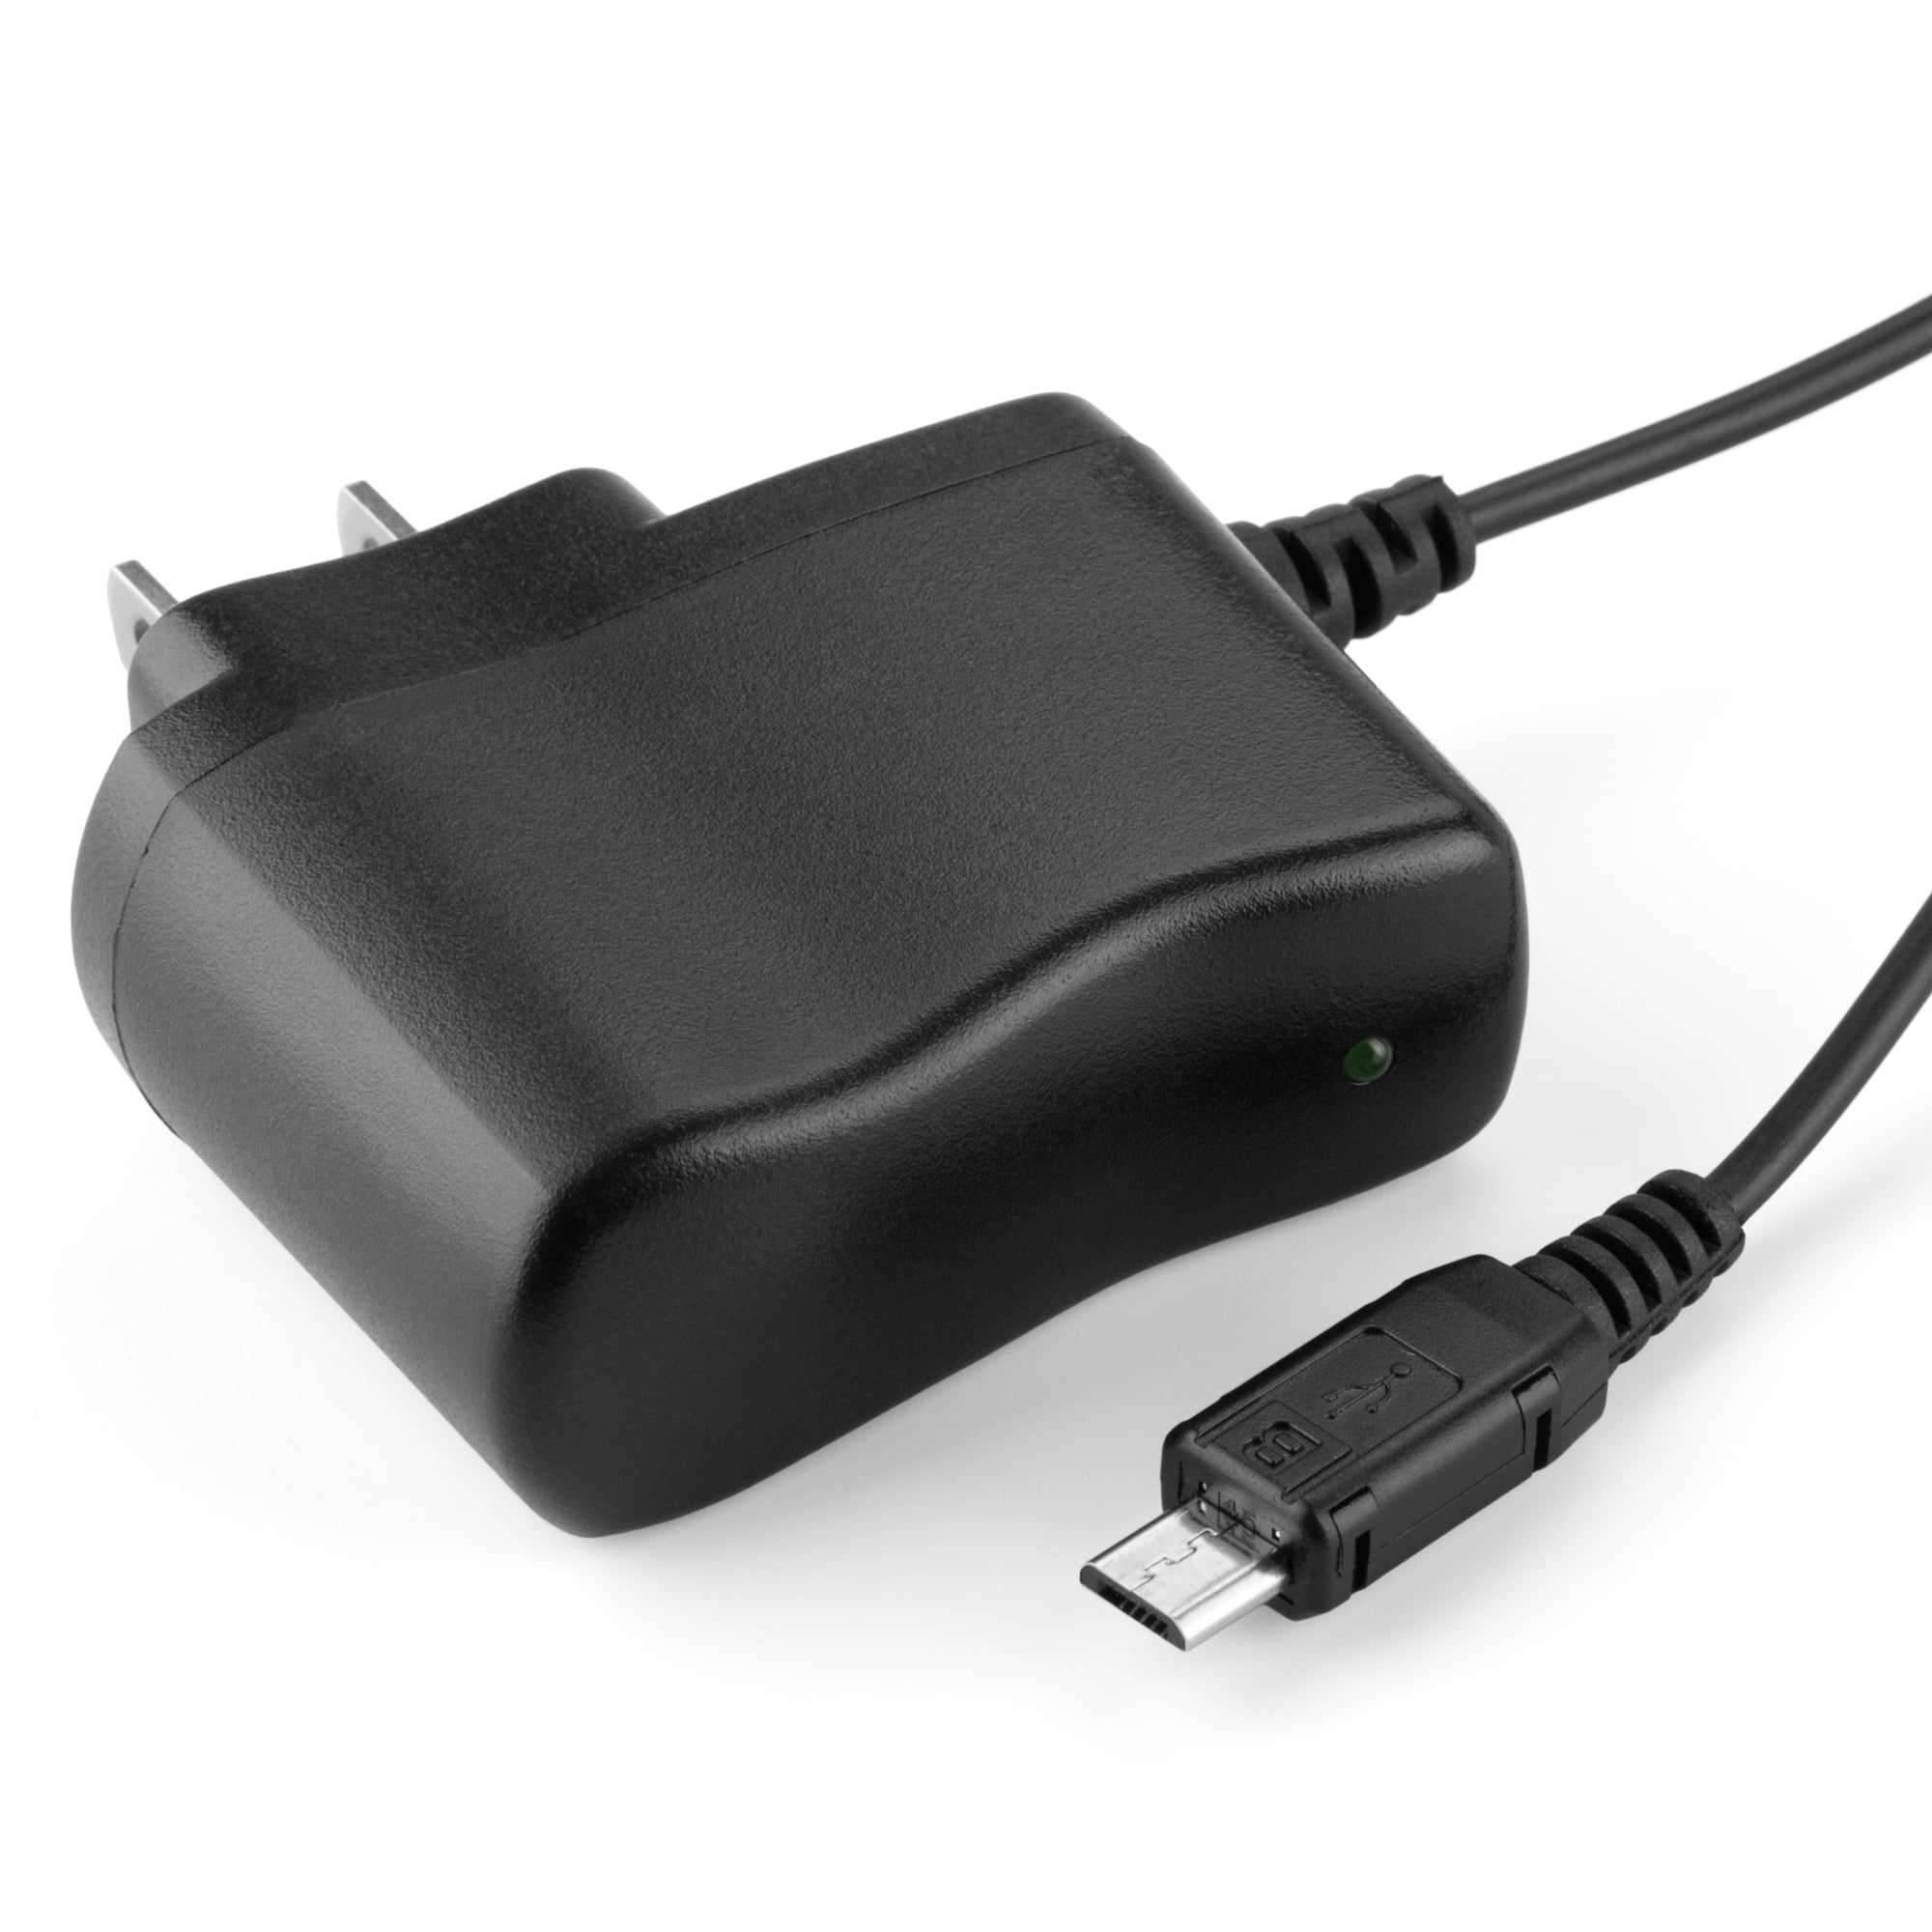 R850 4G LTE Mobile Hotspot Charger Direct Power Adapter Cable Cord R910 Mobile Hotspot UL Listed Wall Charger for Franklin Wireless T9 Mobile Hotspot 